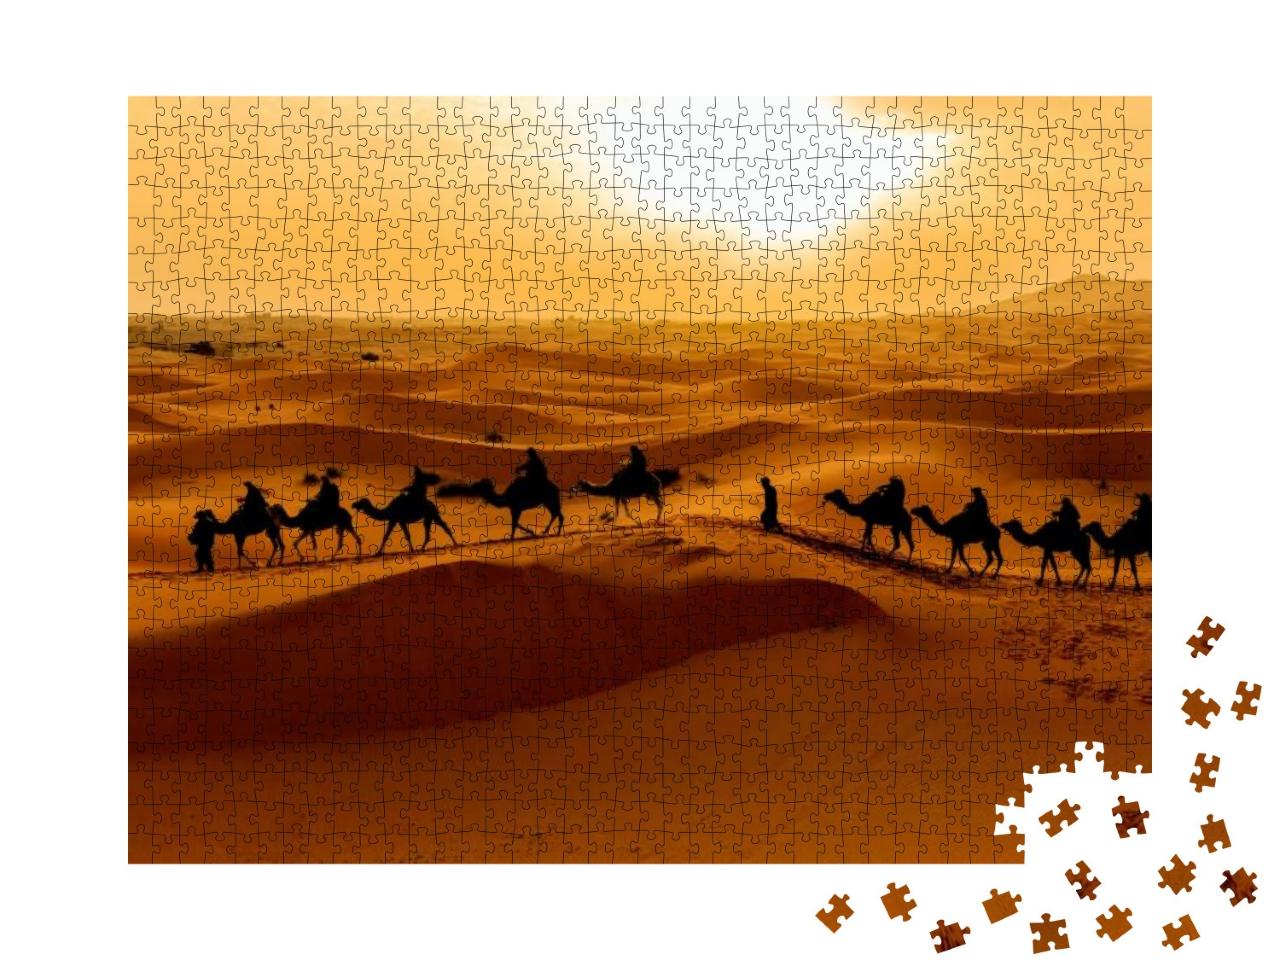 Sahara Desert Silhouette of Camels Caravan of Tourists Ri... Jigsaw Puzzle with 1000 pieces